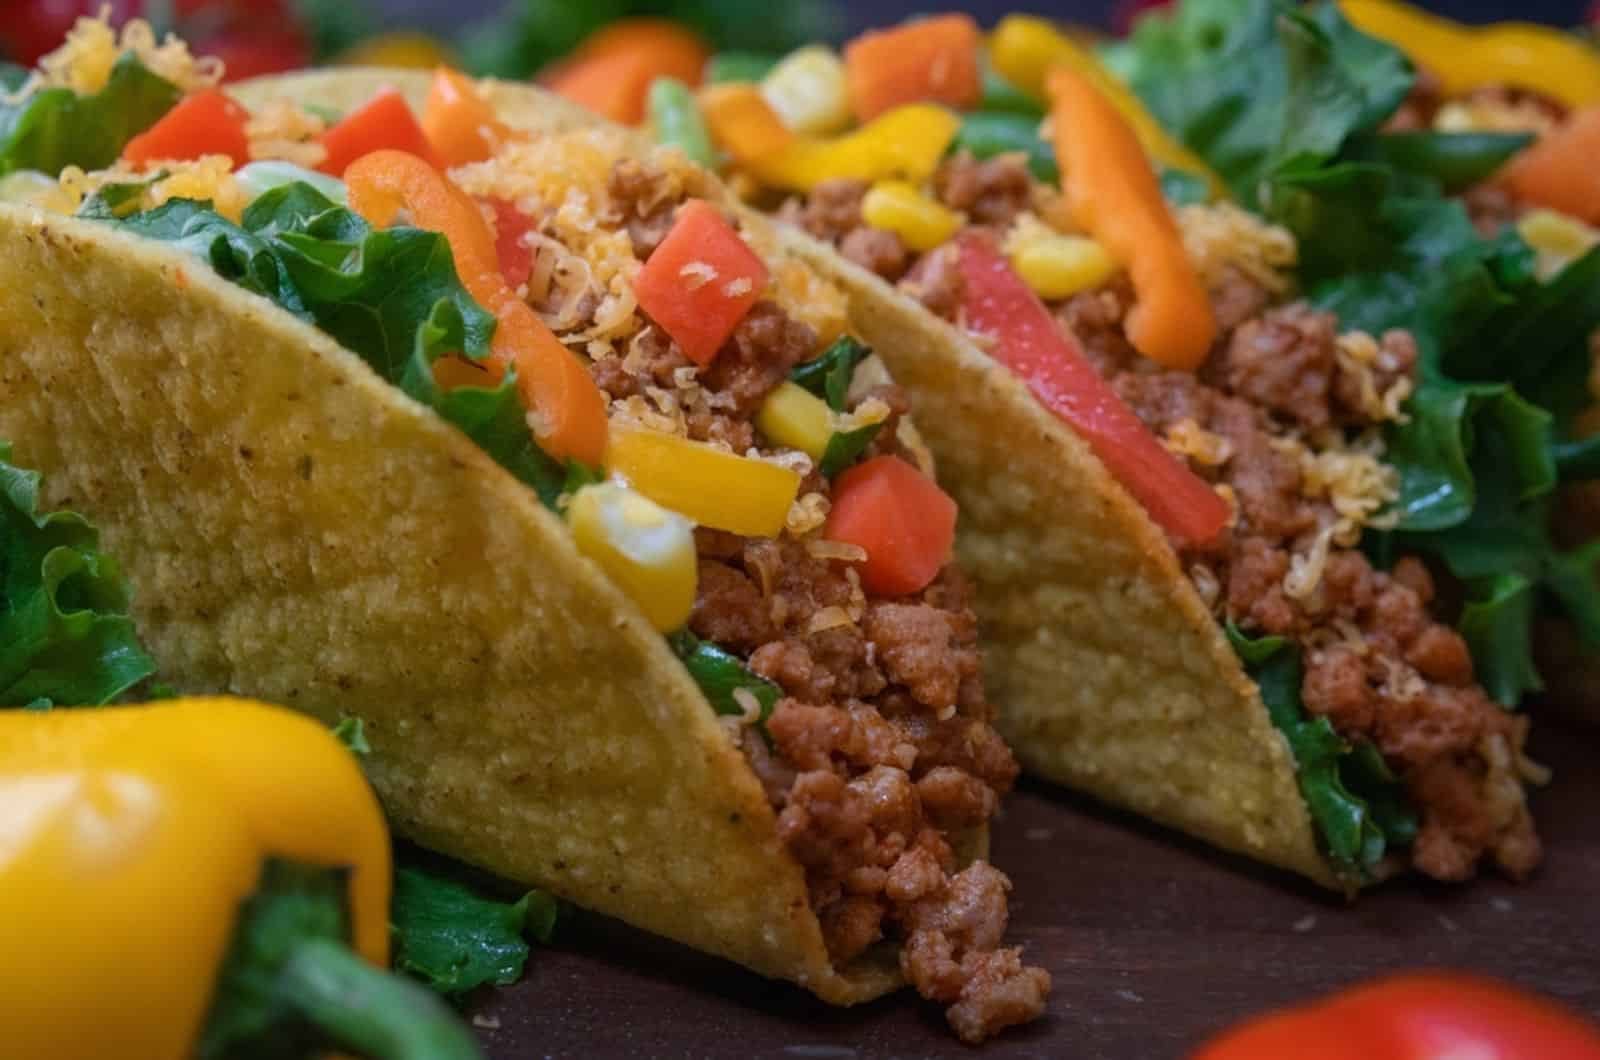 Delicious Crunchy Hard Shell Tacos made with the freshest ingredient